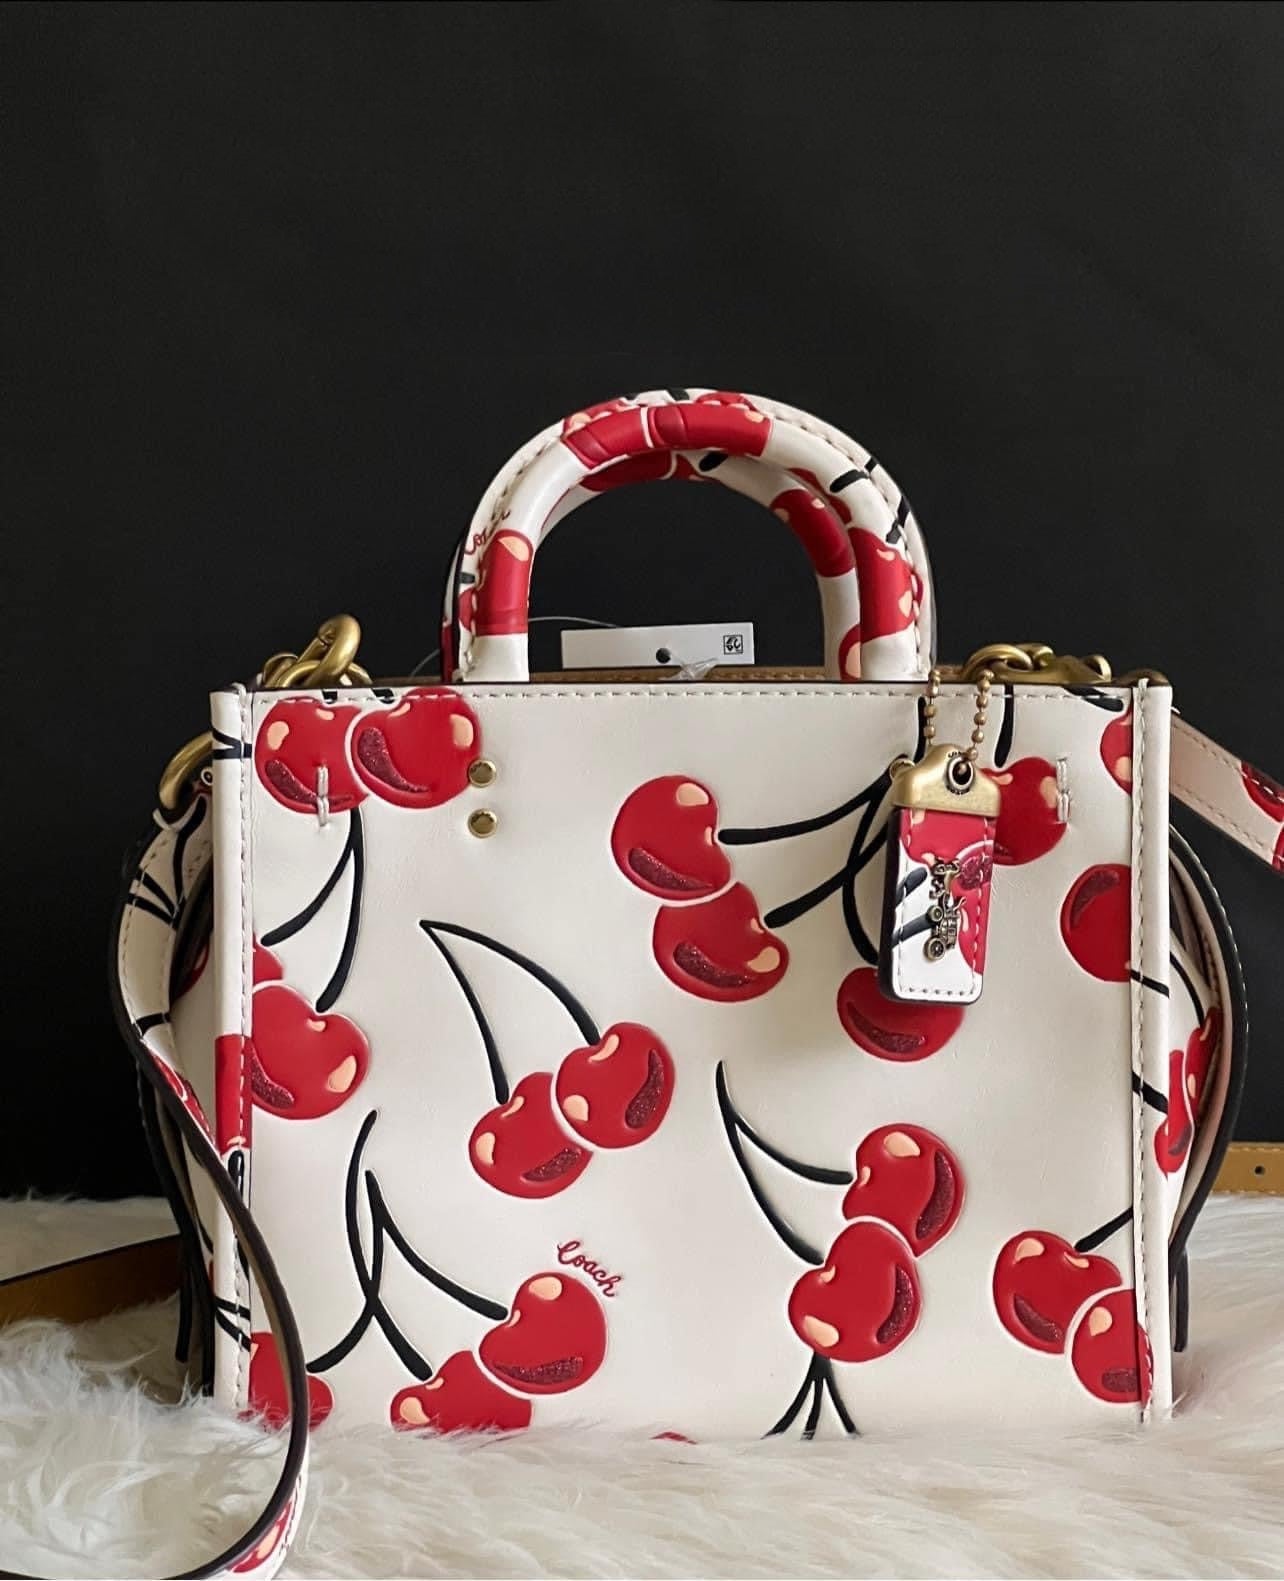 Coach 1941 Rogue 25 in Black with Cherries Cherry Bag - Shoulder